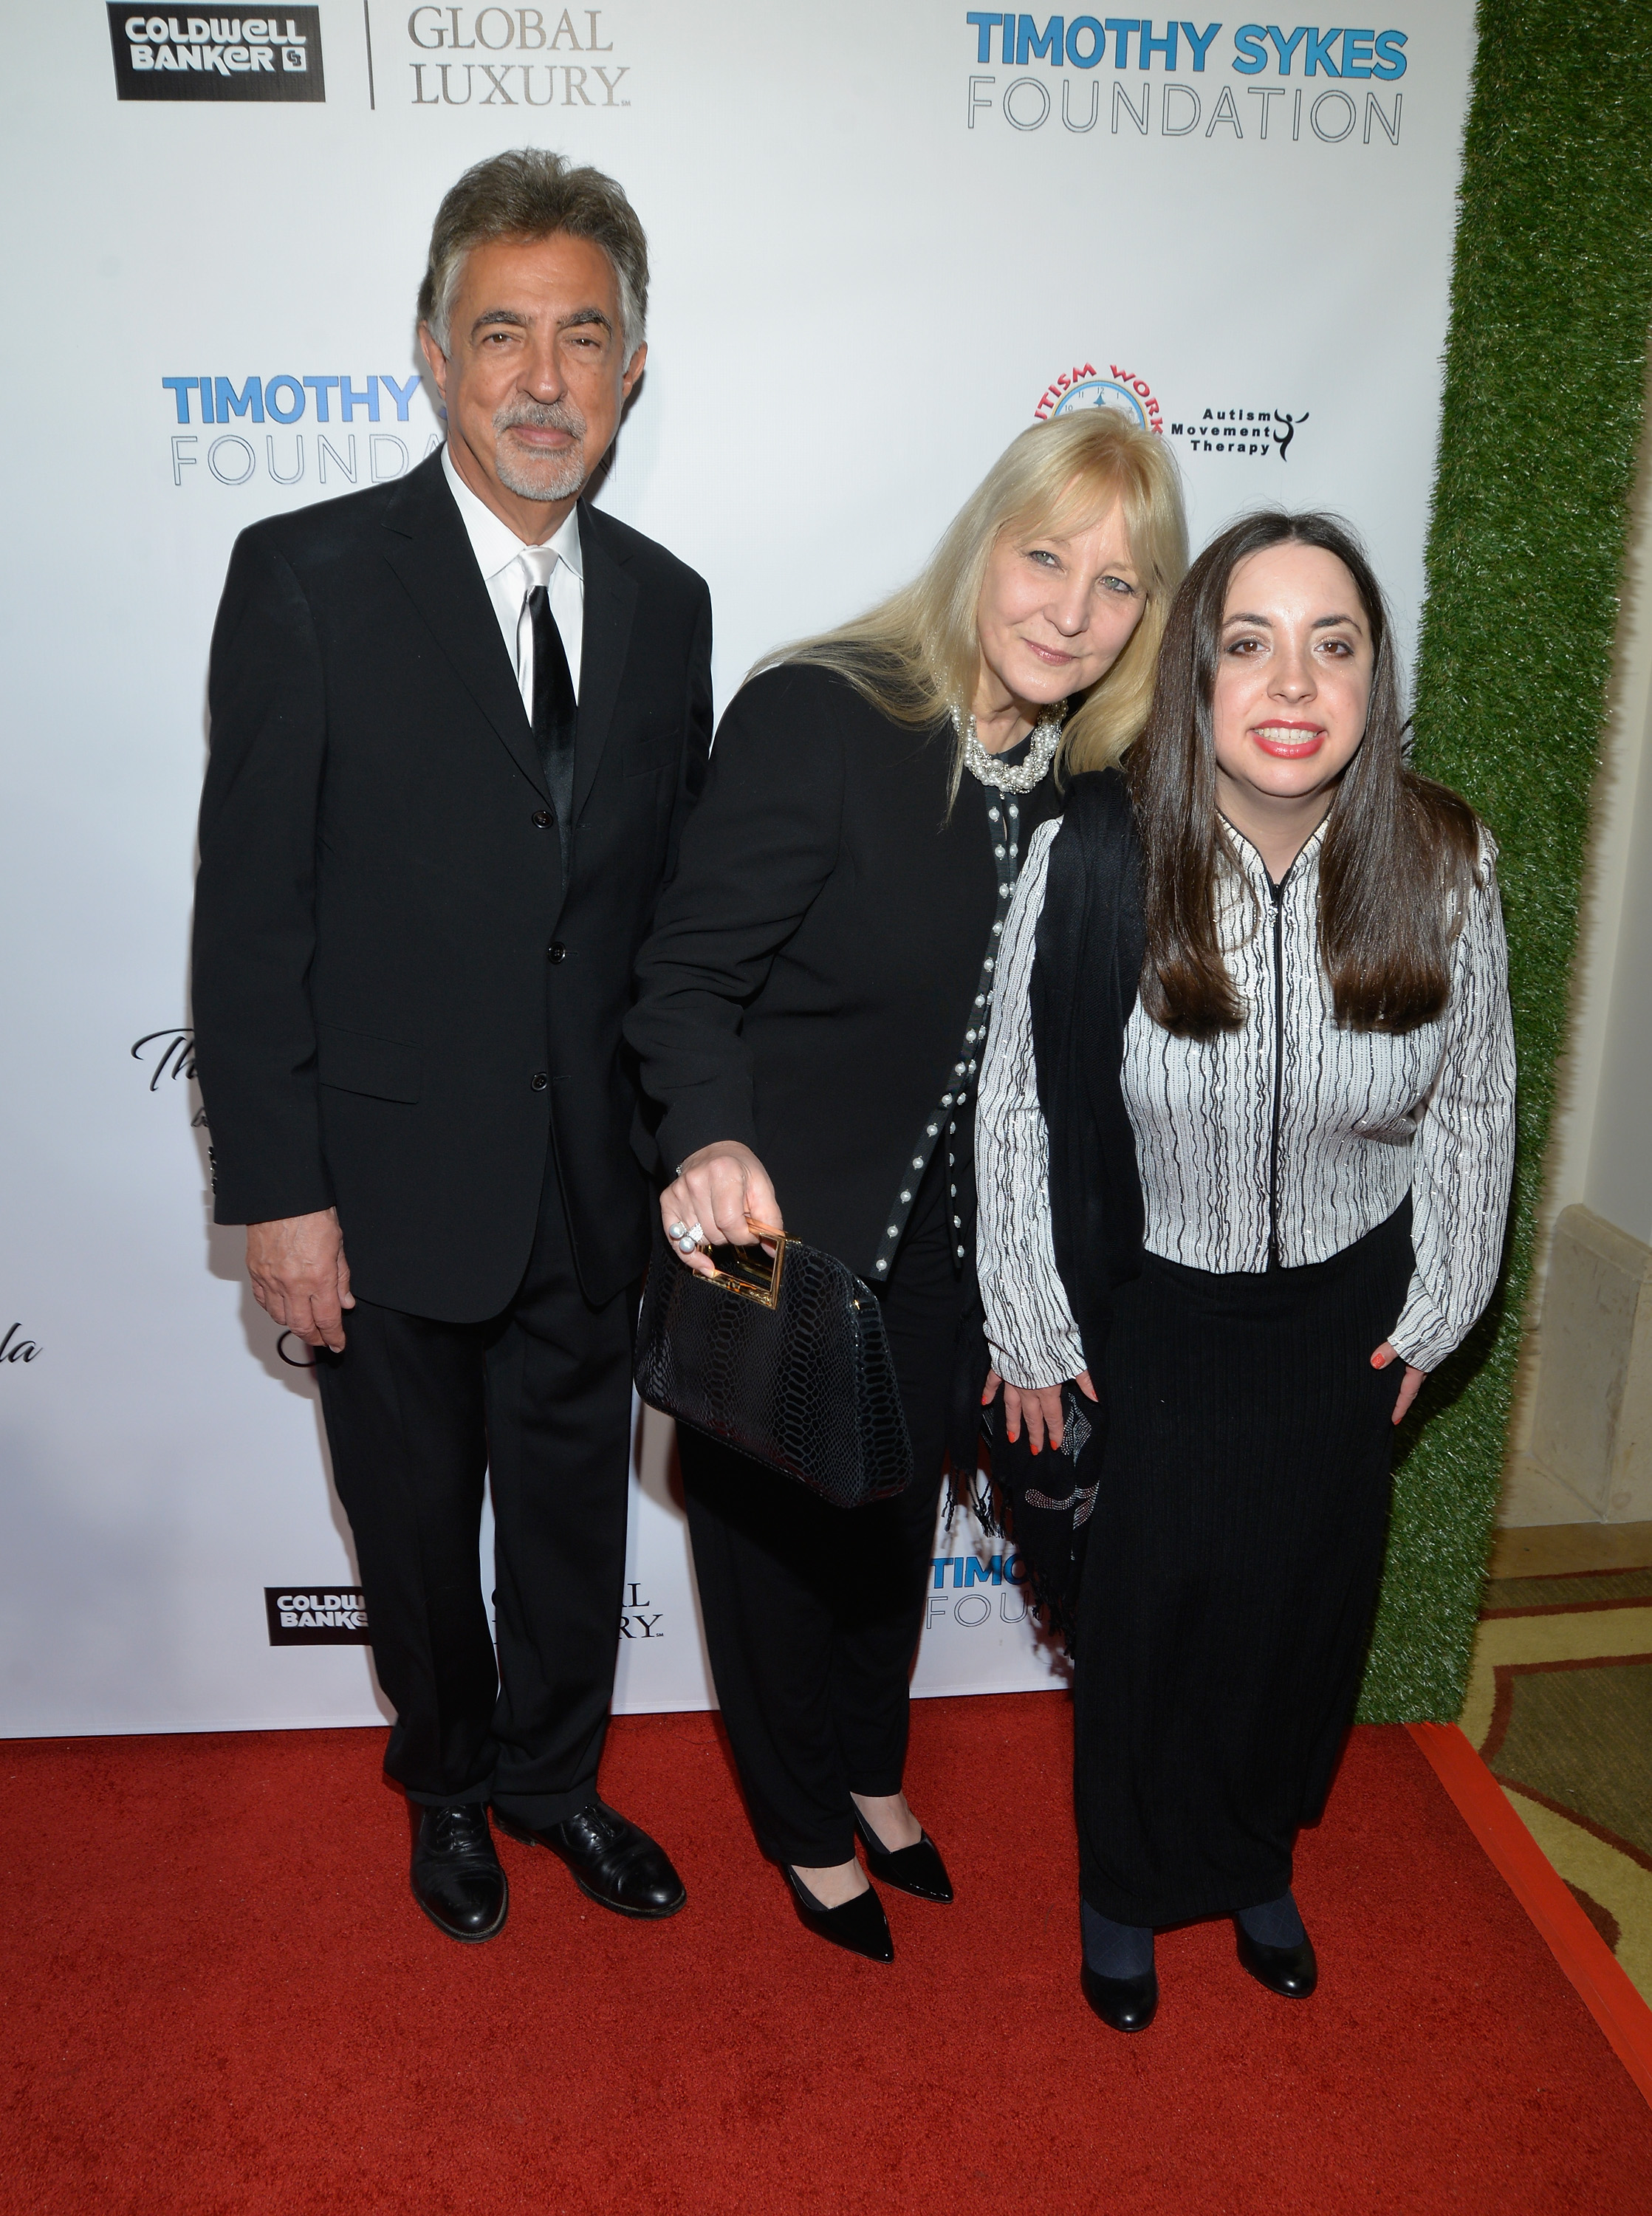 Joe Mantegna, Arlene Vhrel, and Mia Mantegna at AMT's 2017 D.R.E.A.M. Gala in Beverly Hills, California on November 11, 2017 | Source: Getty Images